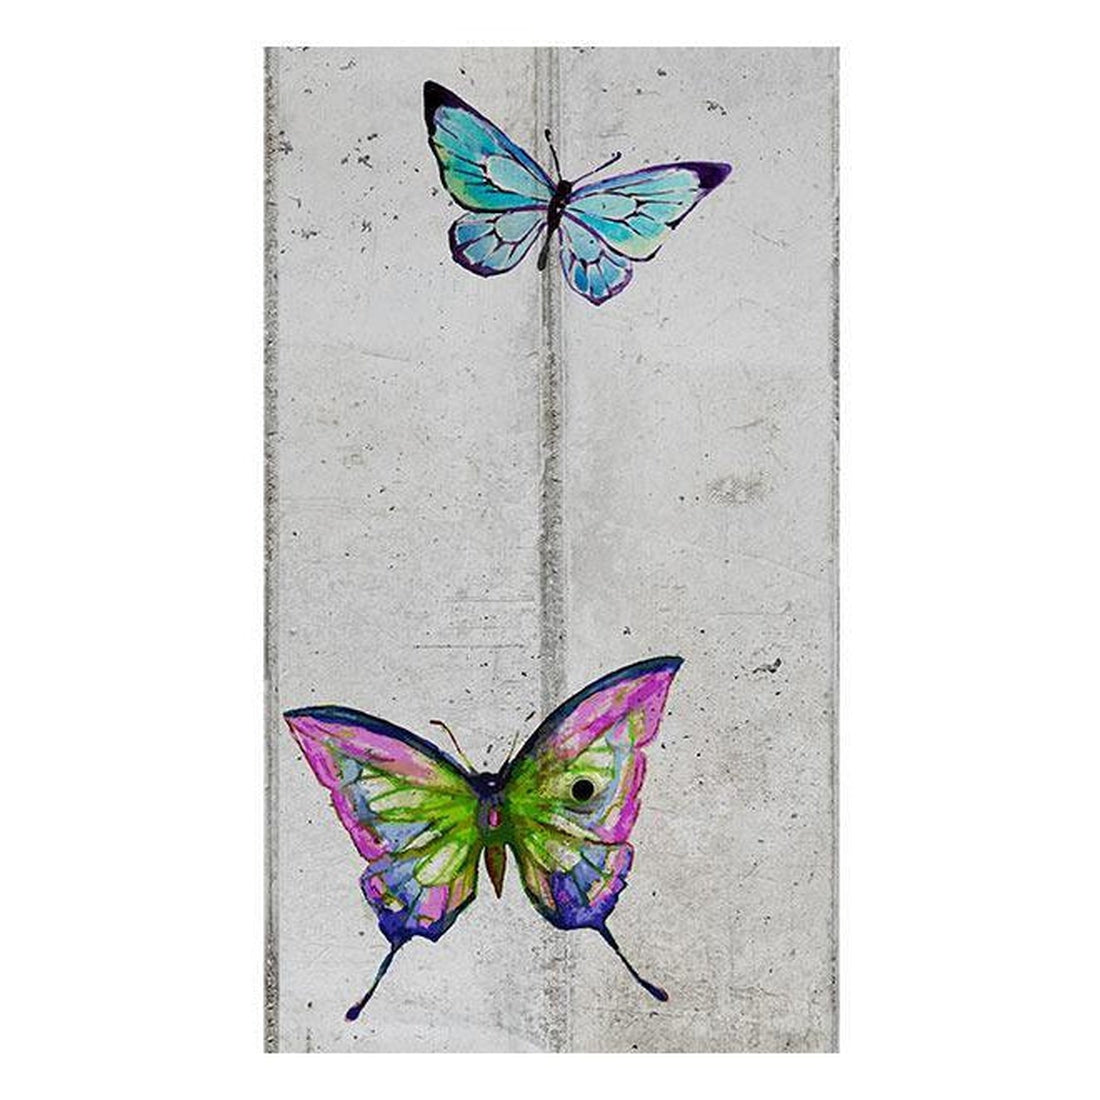 Wall mural - Butterflies and Concrete-TipTopHomeDecor